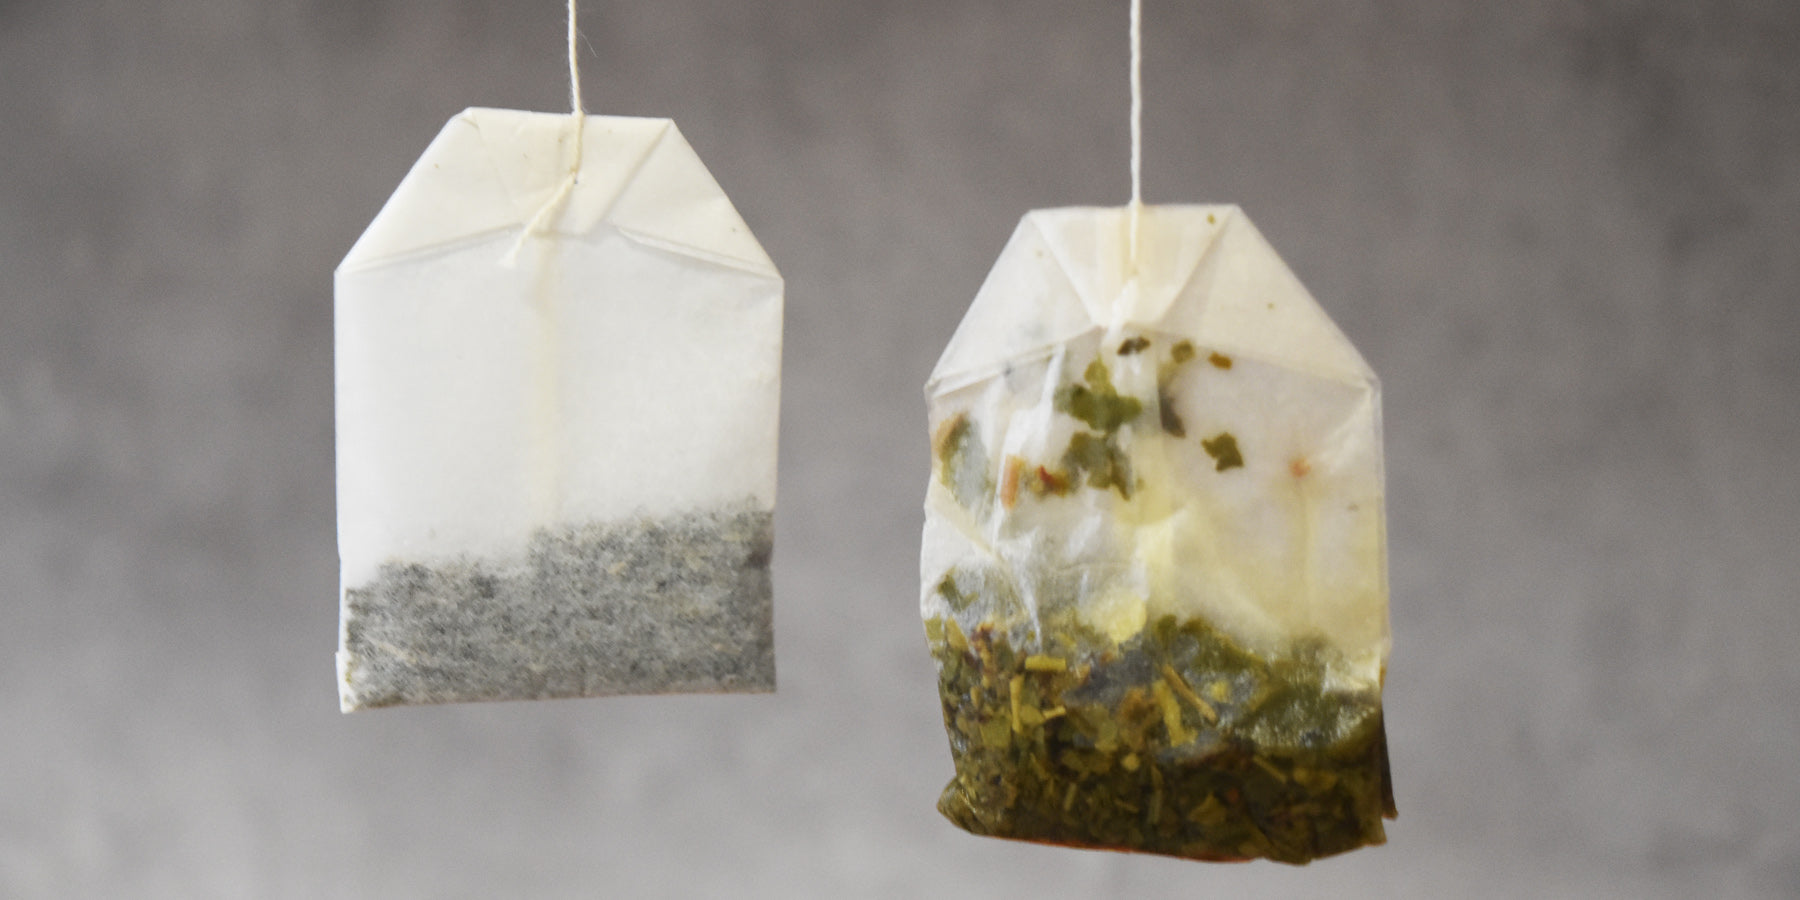 Main ingredient: disappointment. The truth behind Matcha tea bags.